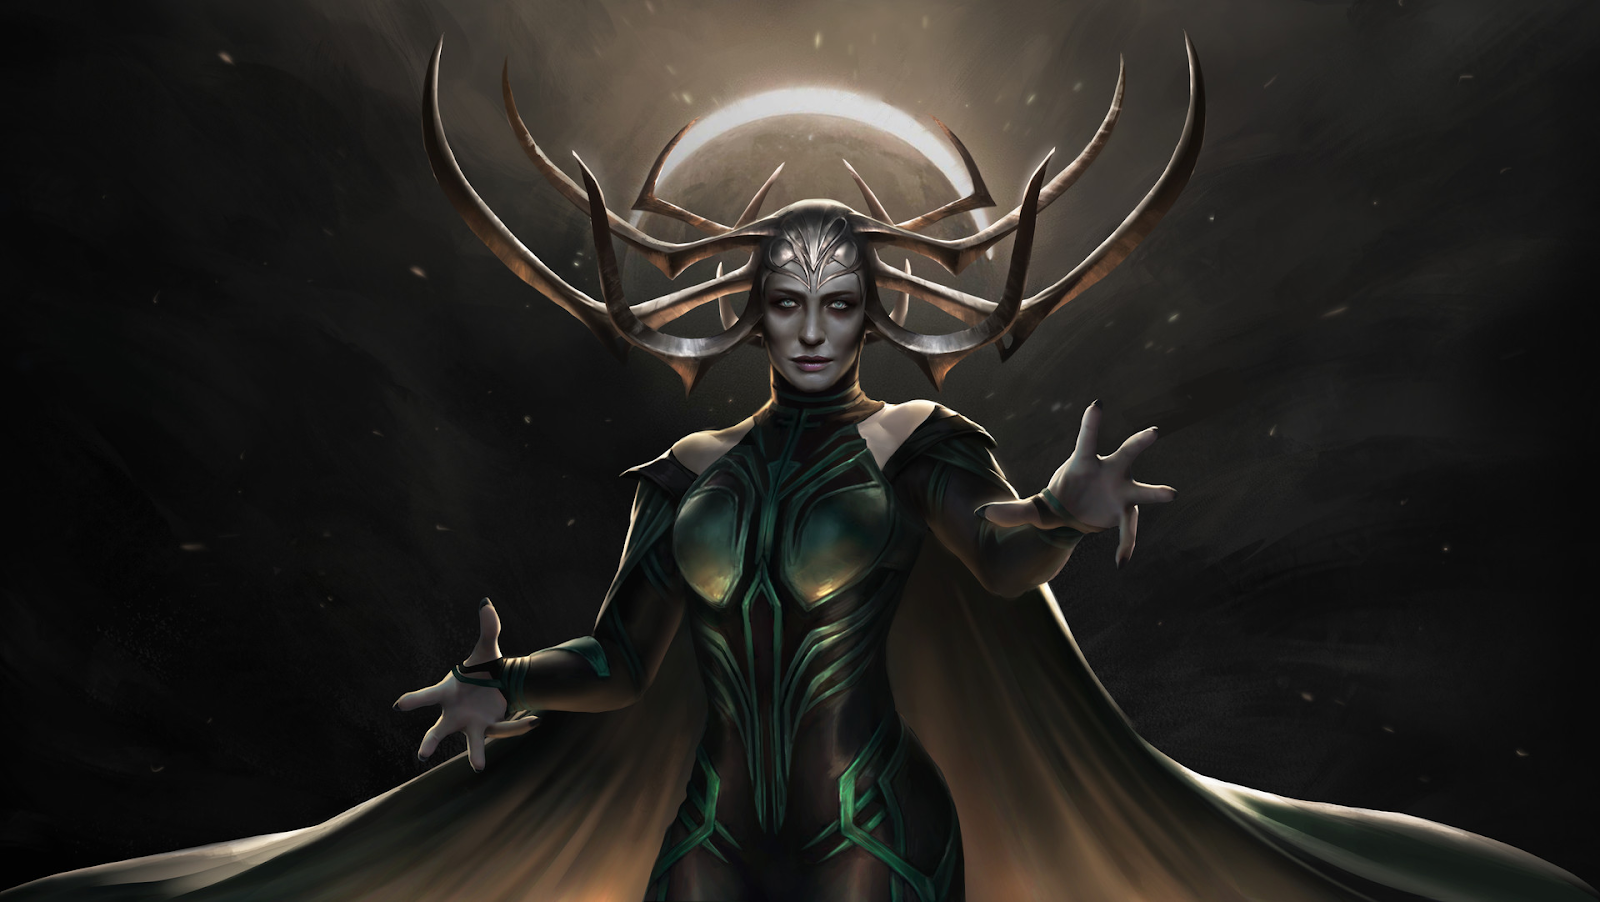 The image presented showcases the character of Hela from the widely popular Marvel film Thor Ragnarok. Hela is donned in a sleek black bodysuit adorned with intricate green details and is further accessorized with a striking horned headpiece.